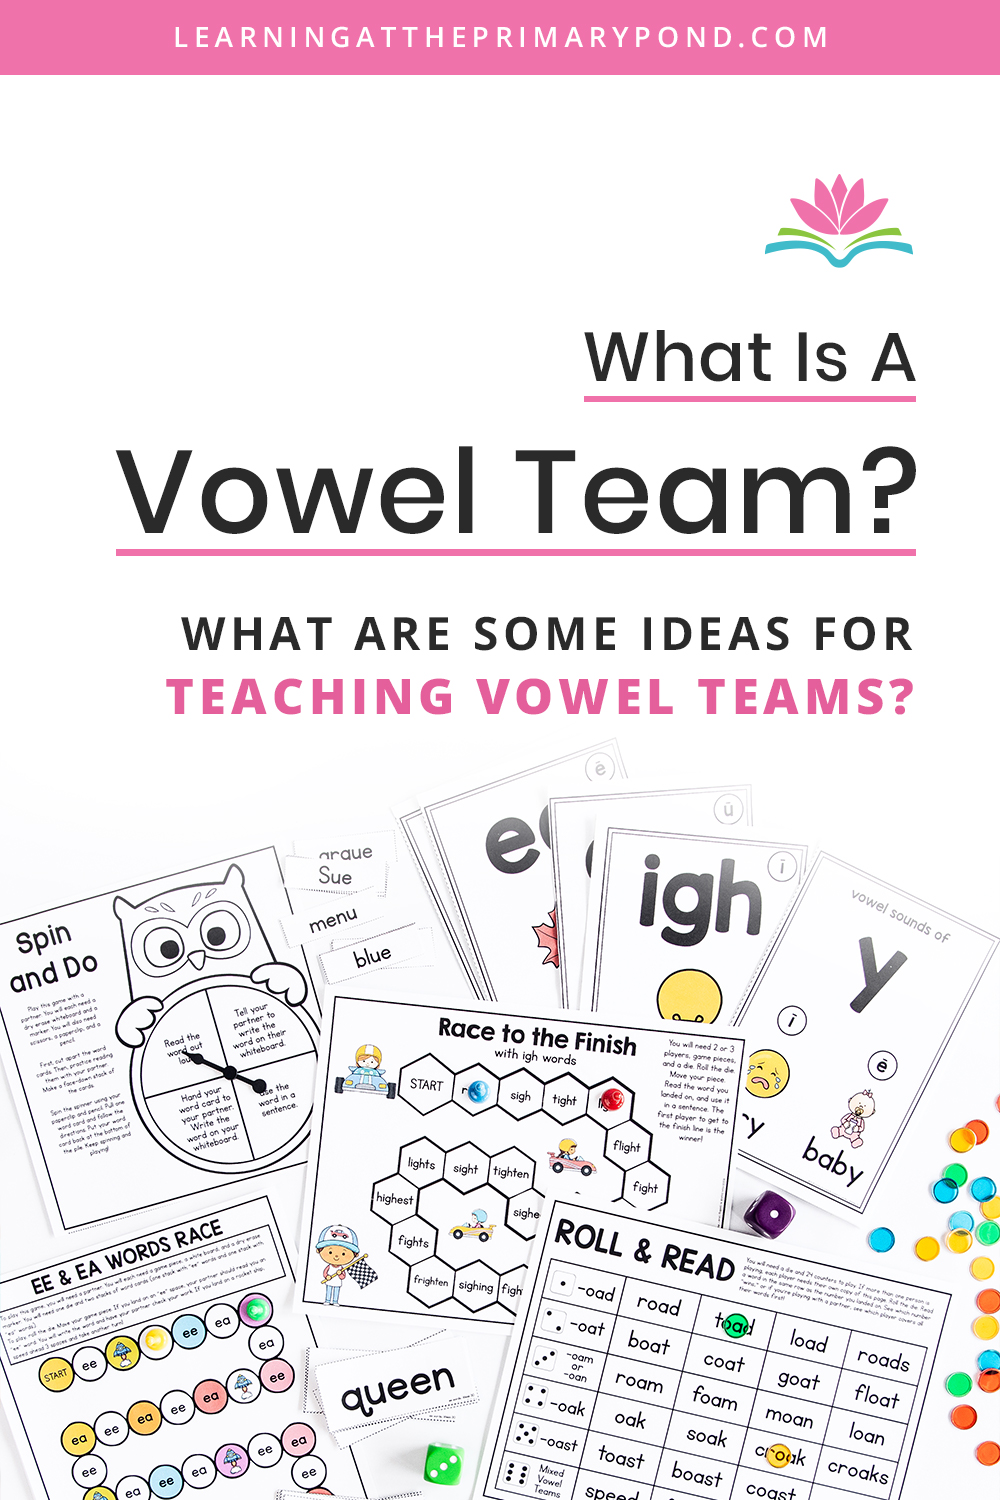 What Is A Vowel Team What Are Some Ideas For Teaching Vowel Teams Learning At The Primary Pond